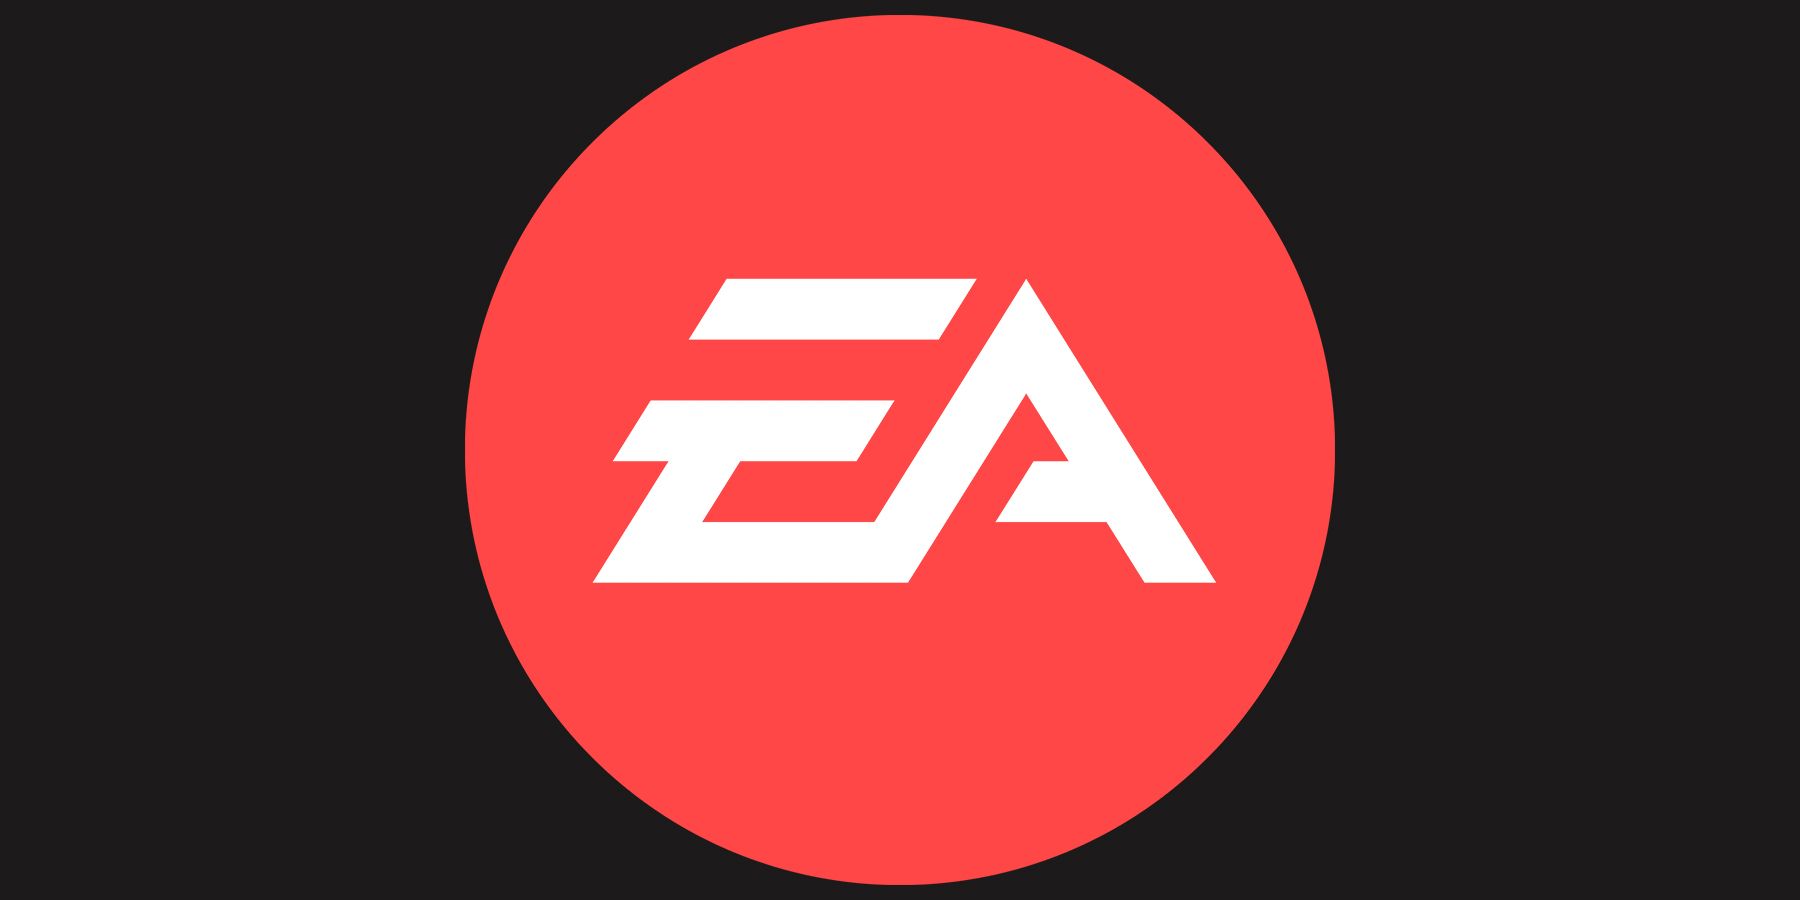 Unannounced EA Game Could Be Revealed Soon